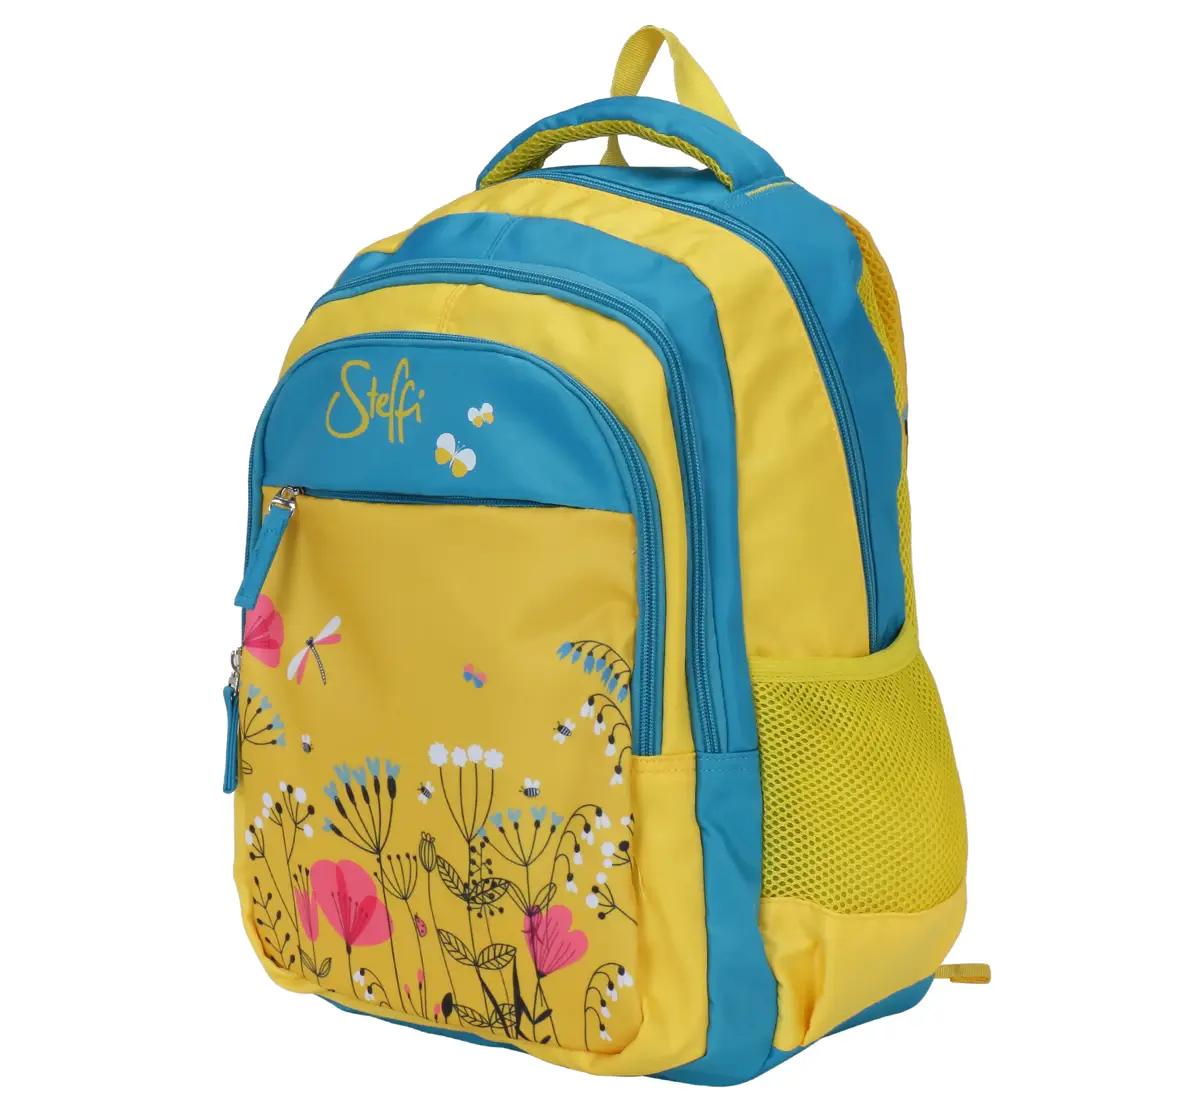 Simba Steffi Love Cherry Blossom 17 Backpack Multicolor 3Y+